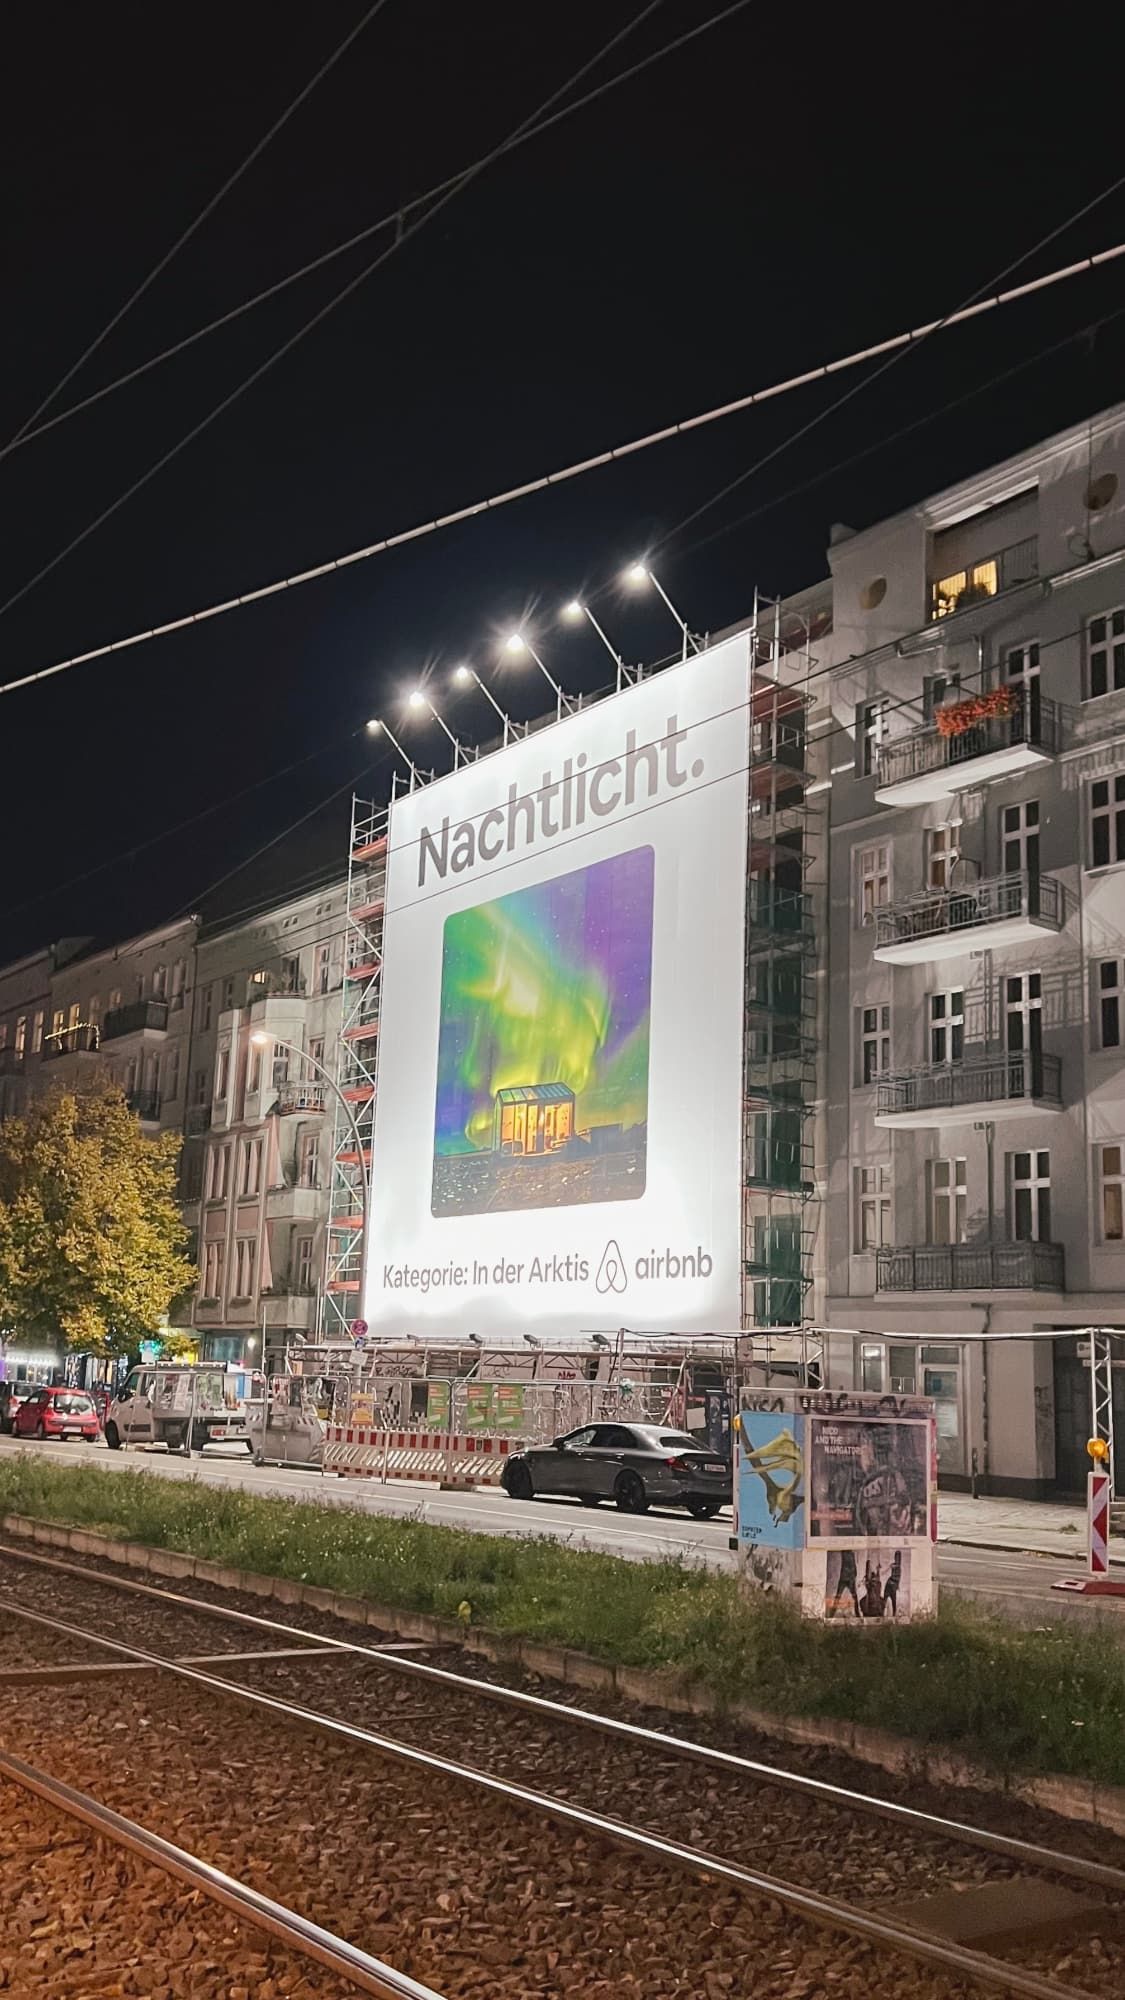 A giant AirBnB billboard in Berlin, advertising a stay under the Northern Lights.